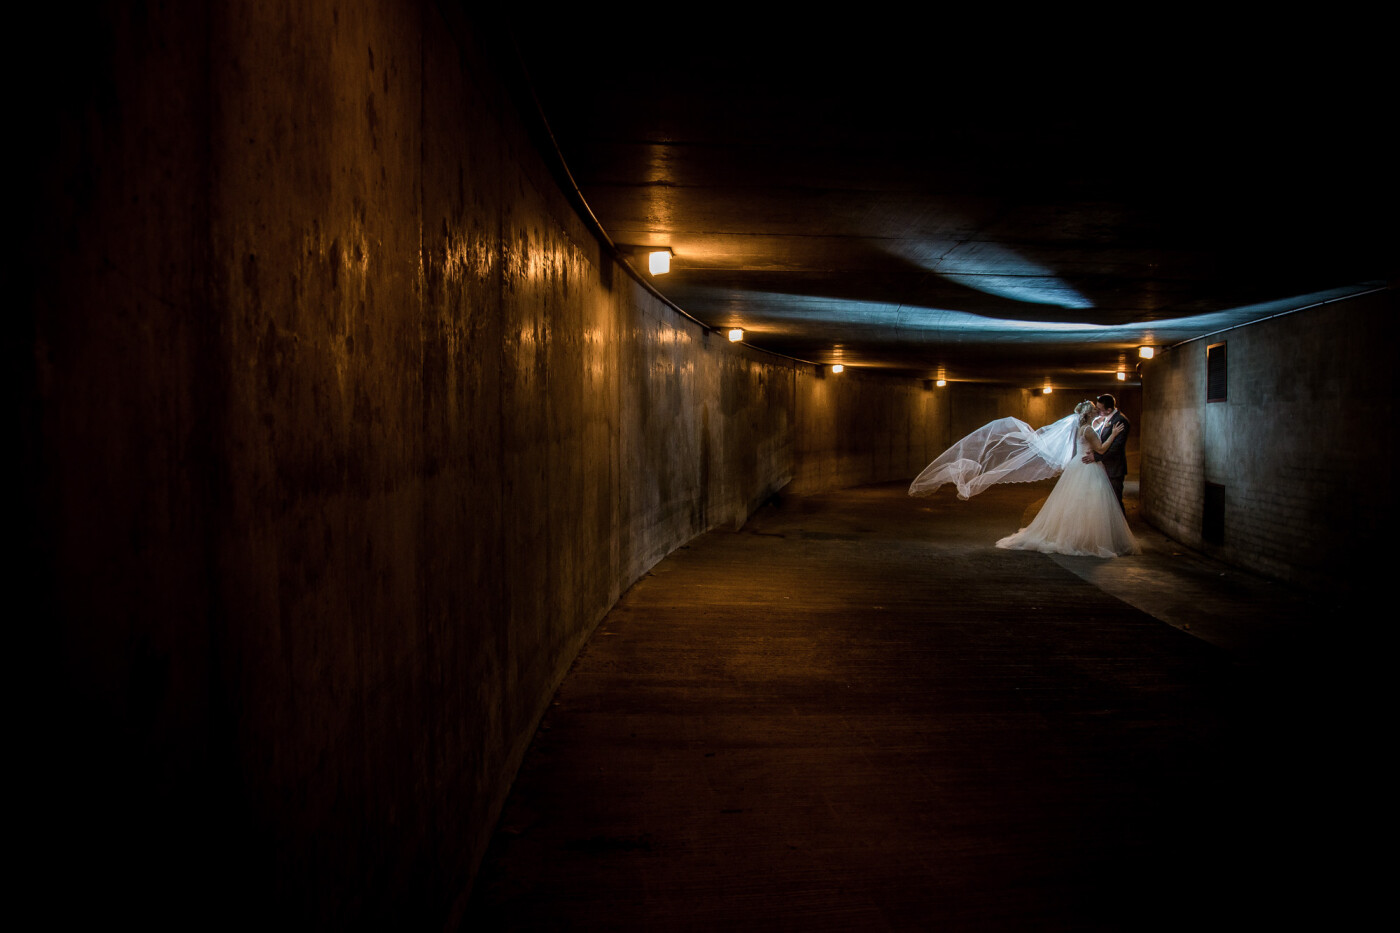 This shot is from the wedding day of Jaye + Dave, they were married in October. The shot is captured in an underground tunnel leading to a car park. Our couple were tired as this shot was at the end of their location photography on their wedding day. We quickly set up a couple of flashes and our couple quickly got in place. One of us then flicked the bride's veil up and ran out of shot whilst the other took the shot. We're really happy with this image, as is our bride and groom. We were lucky too, a security guard came to tell us to move on just as we'd captured this one. 